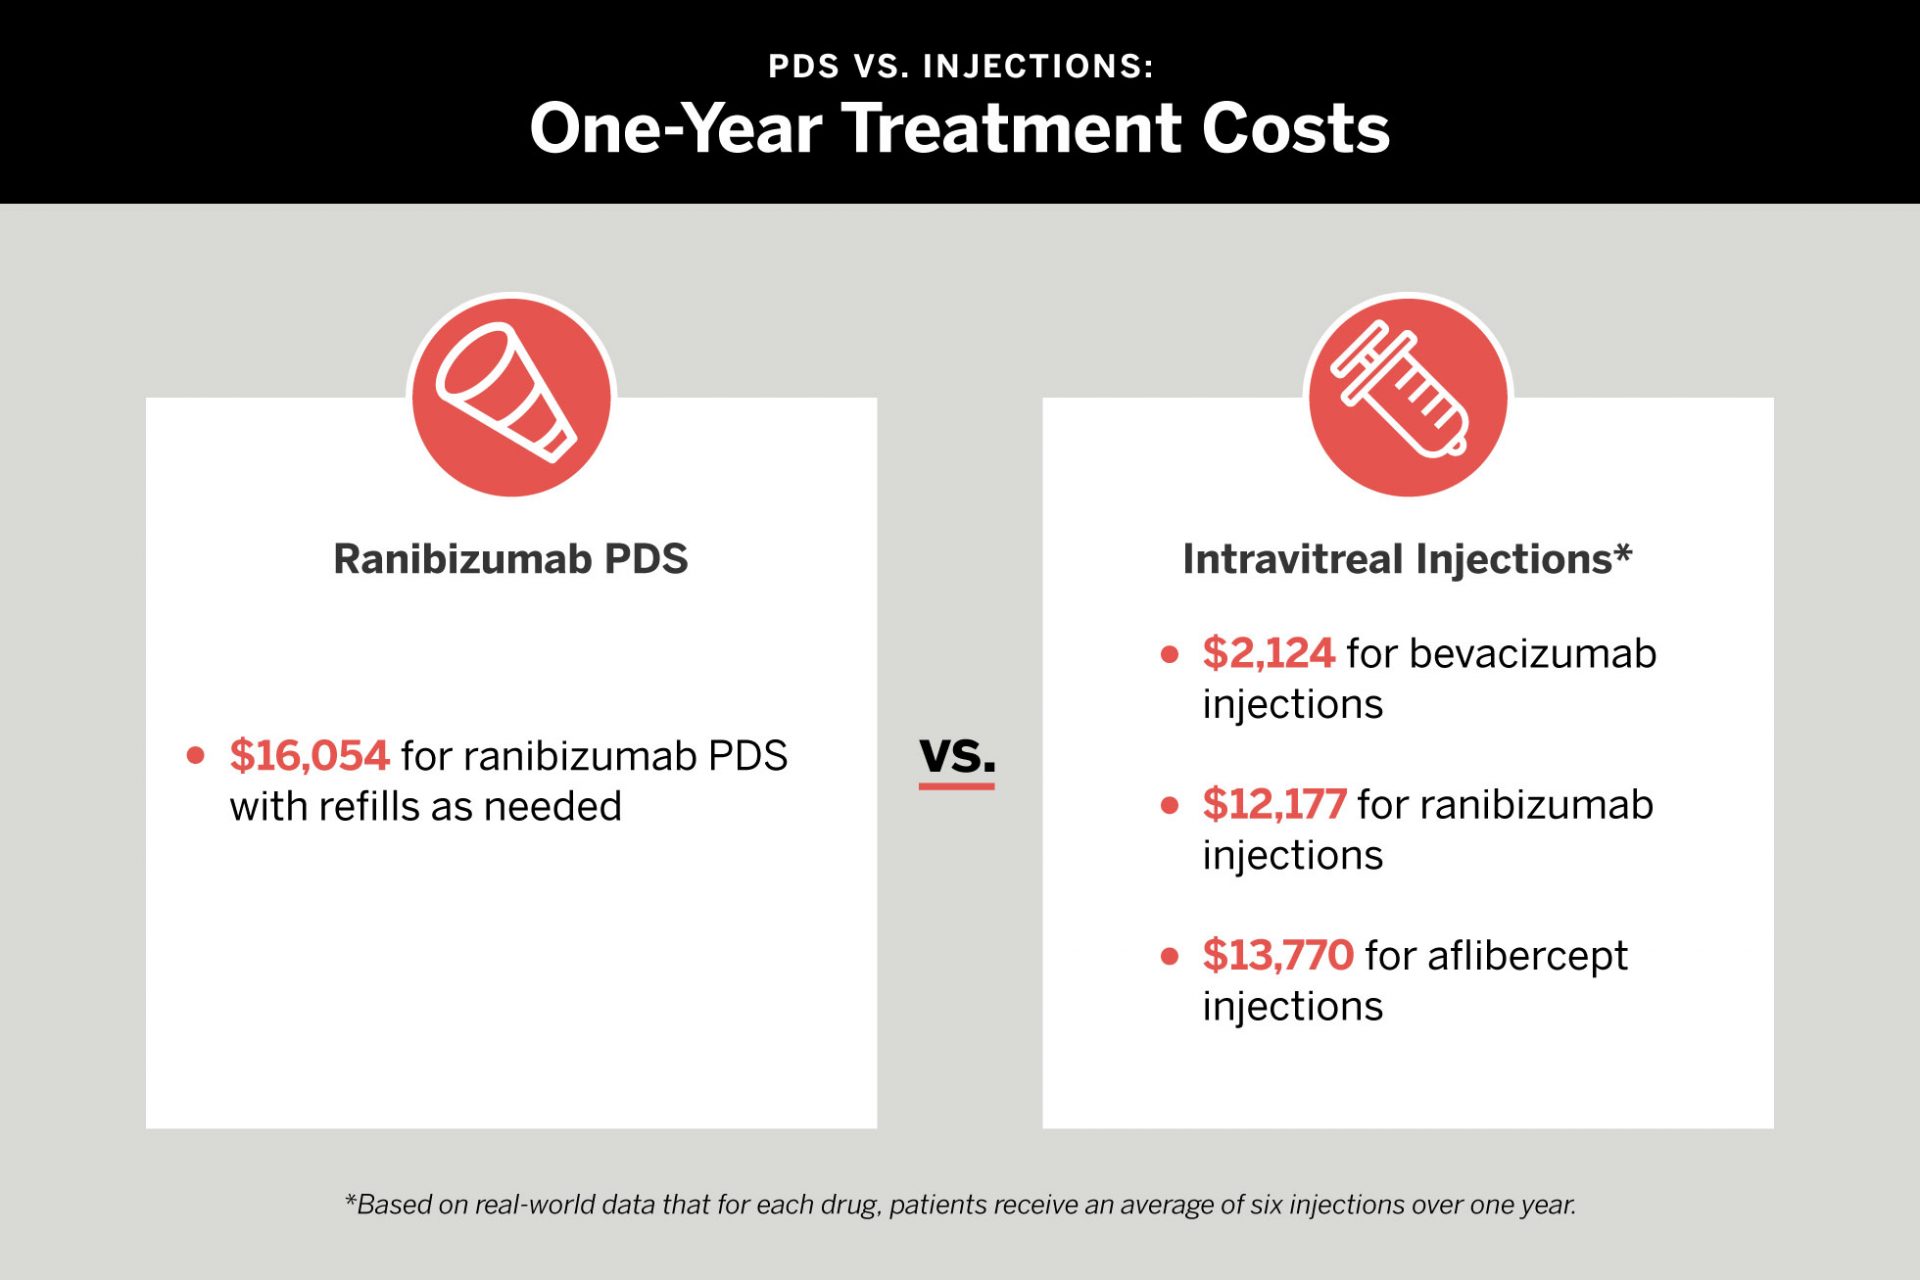 The cost over one year of ranibizumab PDS with refills pro re nata (PRN) versus the cost of real-world regimens of ranibizumab, aflibercept, and bevacizumab injections. ADAPTED FROM: JAMA Ophthalmol. 2022;140(7):716-723.